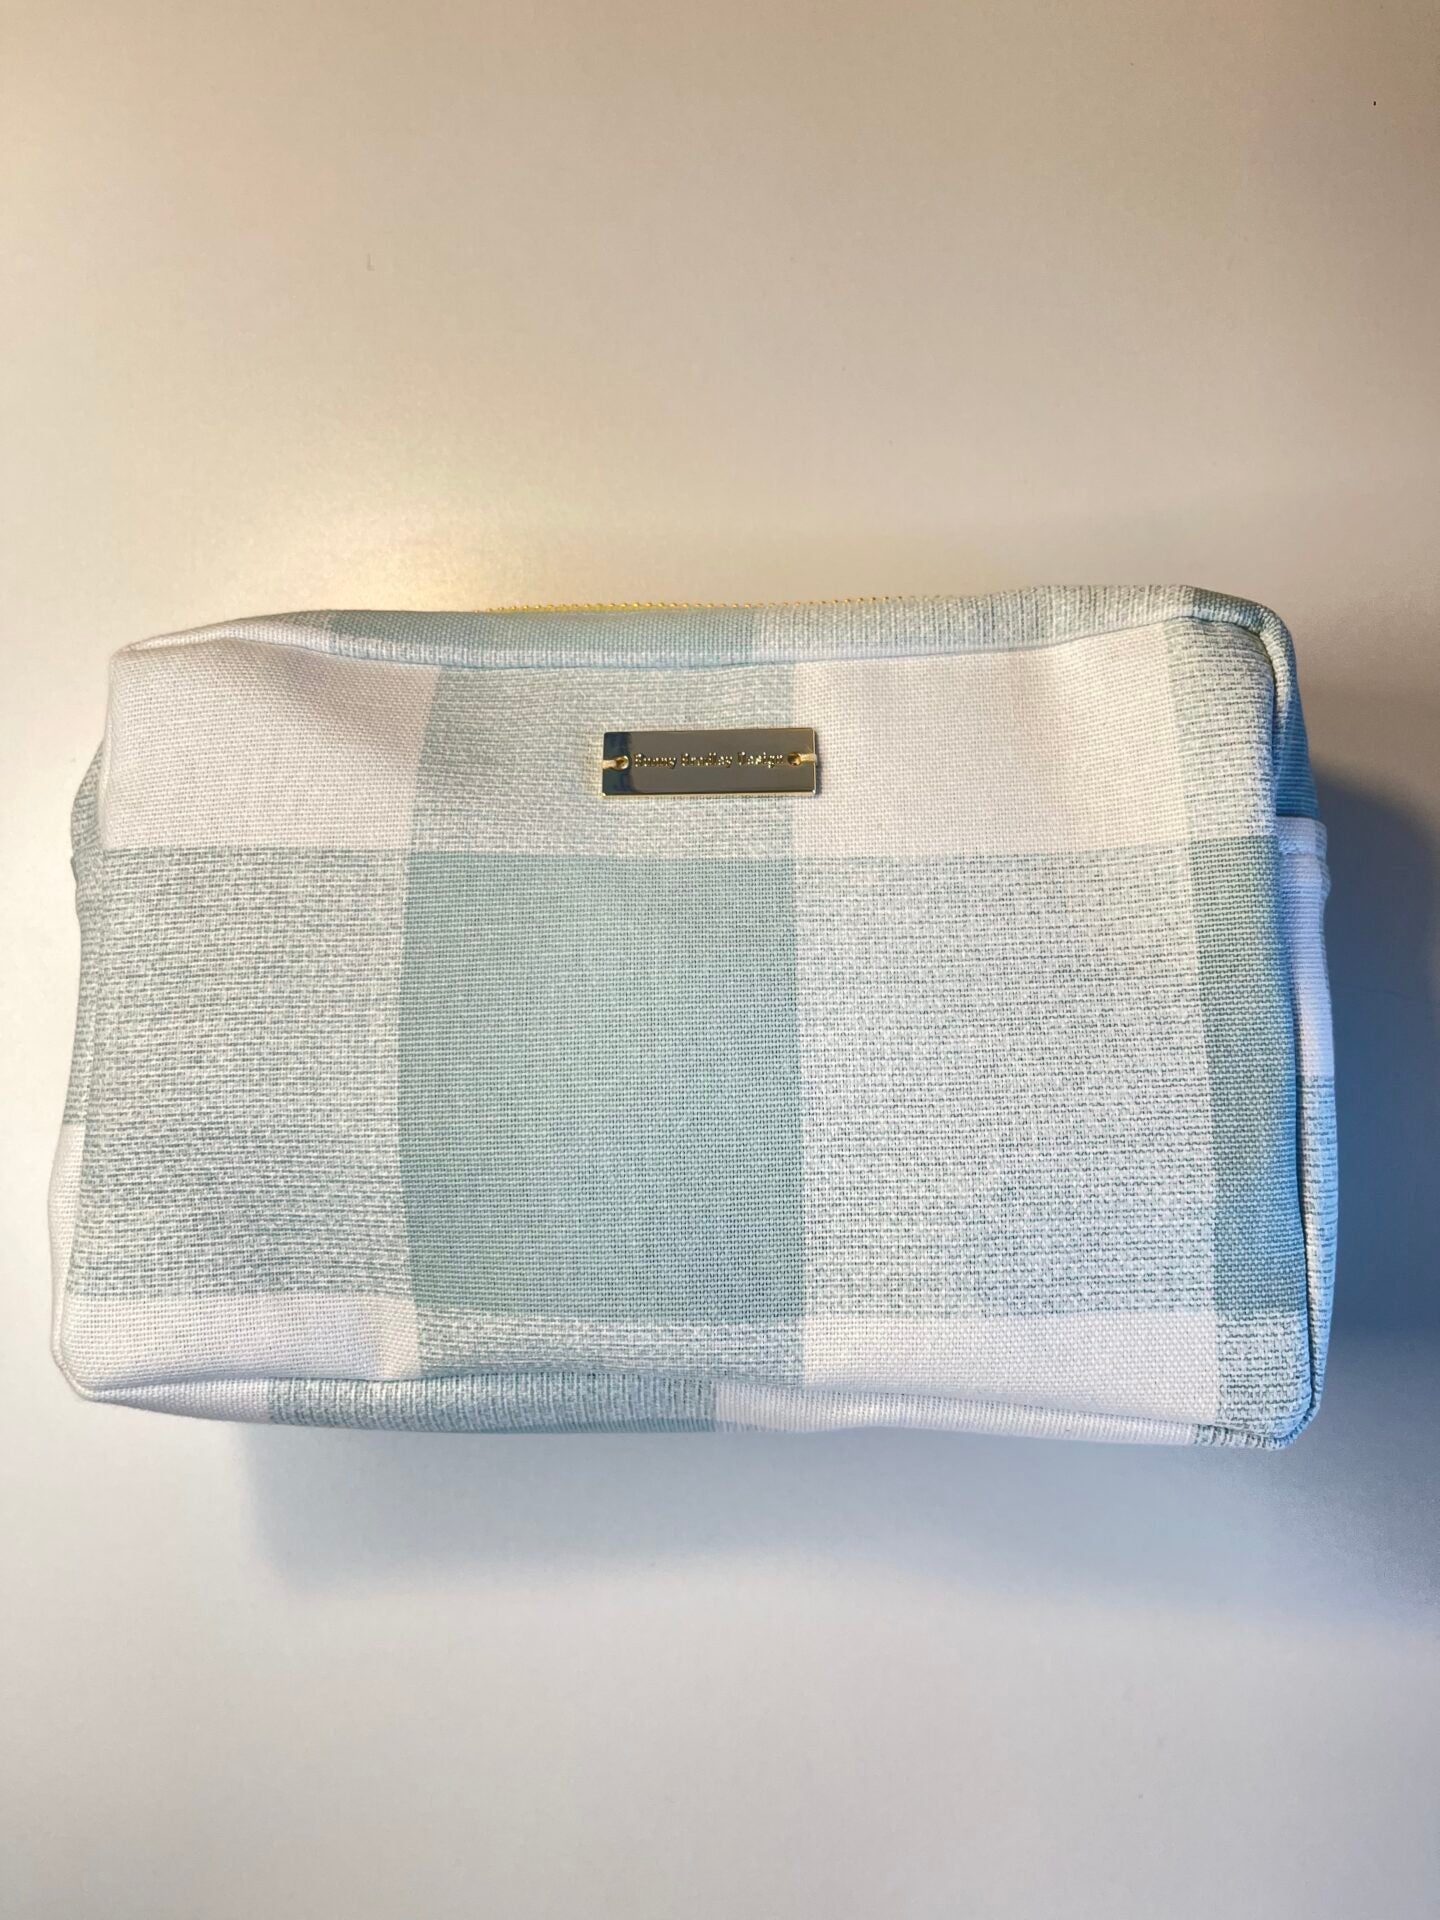 Marigold Large Cosmetic Bag Blue Sky’s Gingham - Gaines Jewelers